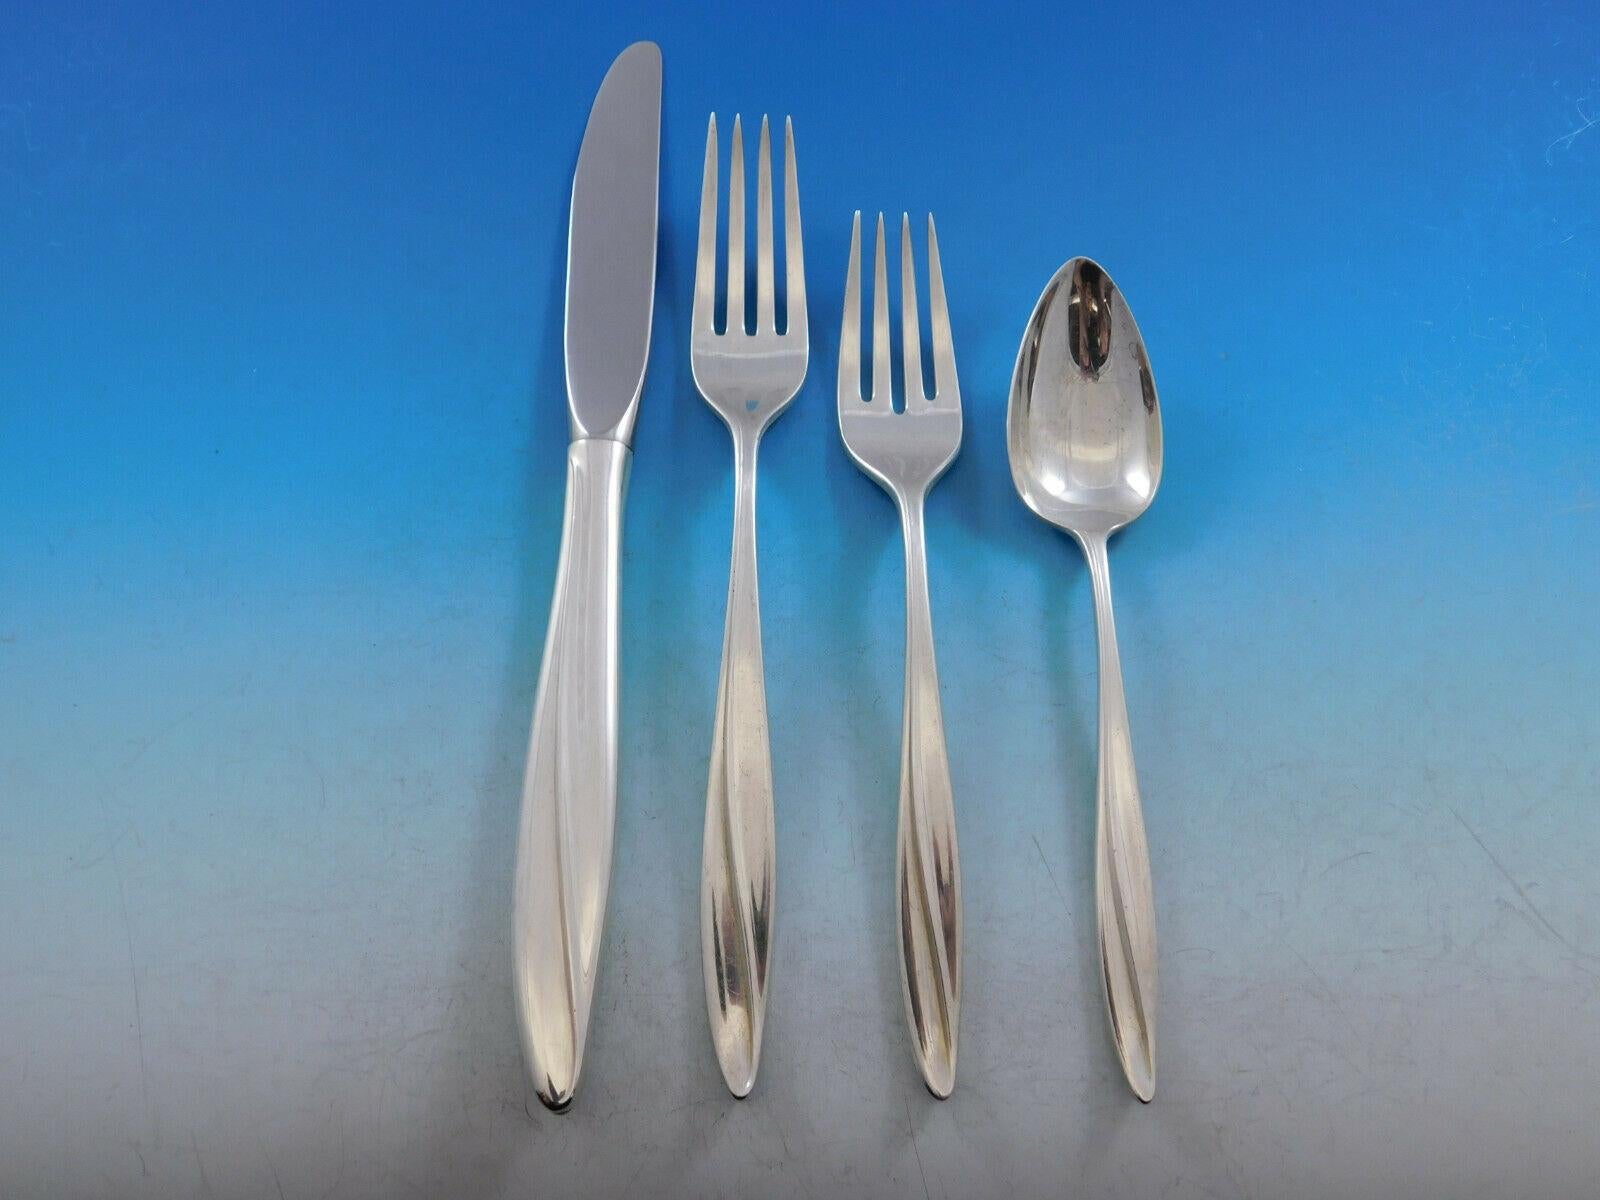 Mid-Century Modern firelight by Gorham circa 1959 sterling silver flatware set - 65 pieces. This set includes:

12 knives, 9